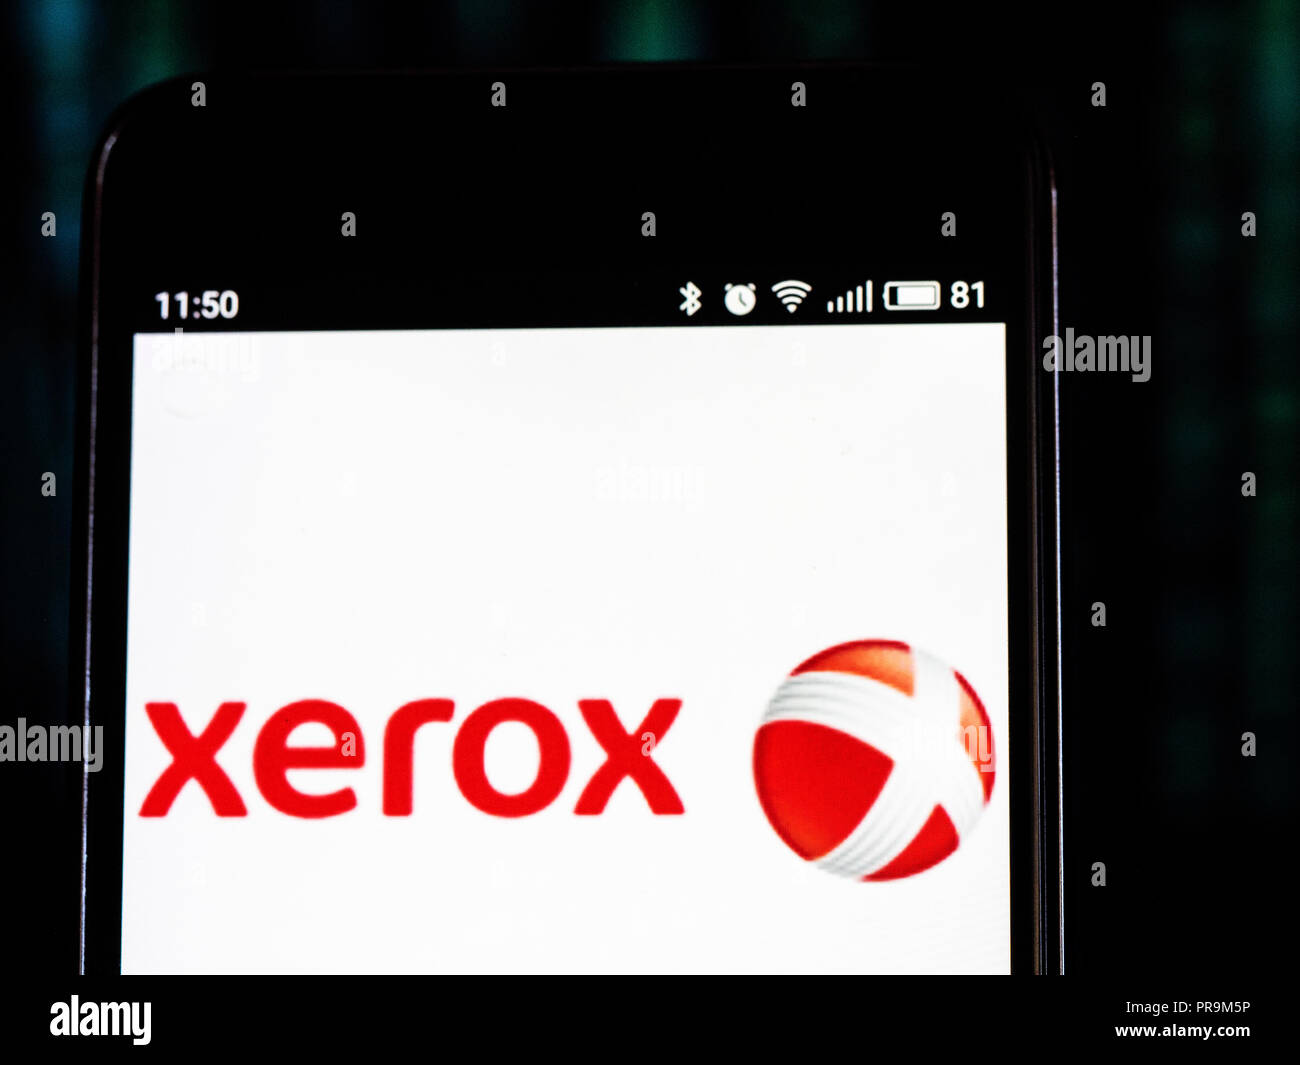 Xerox Corporation logo seen displayed on smart phone. Xerox Corporation is an American global corporation that sells print and digital document solutions, and document technology products in more than 160 countries. Stock Photo